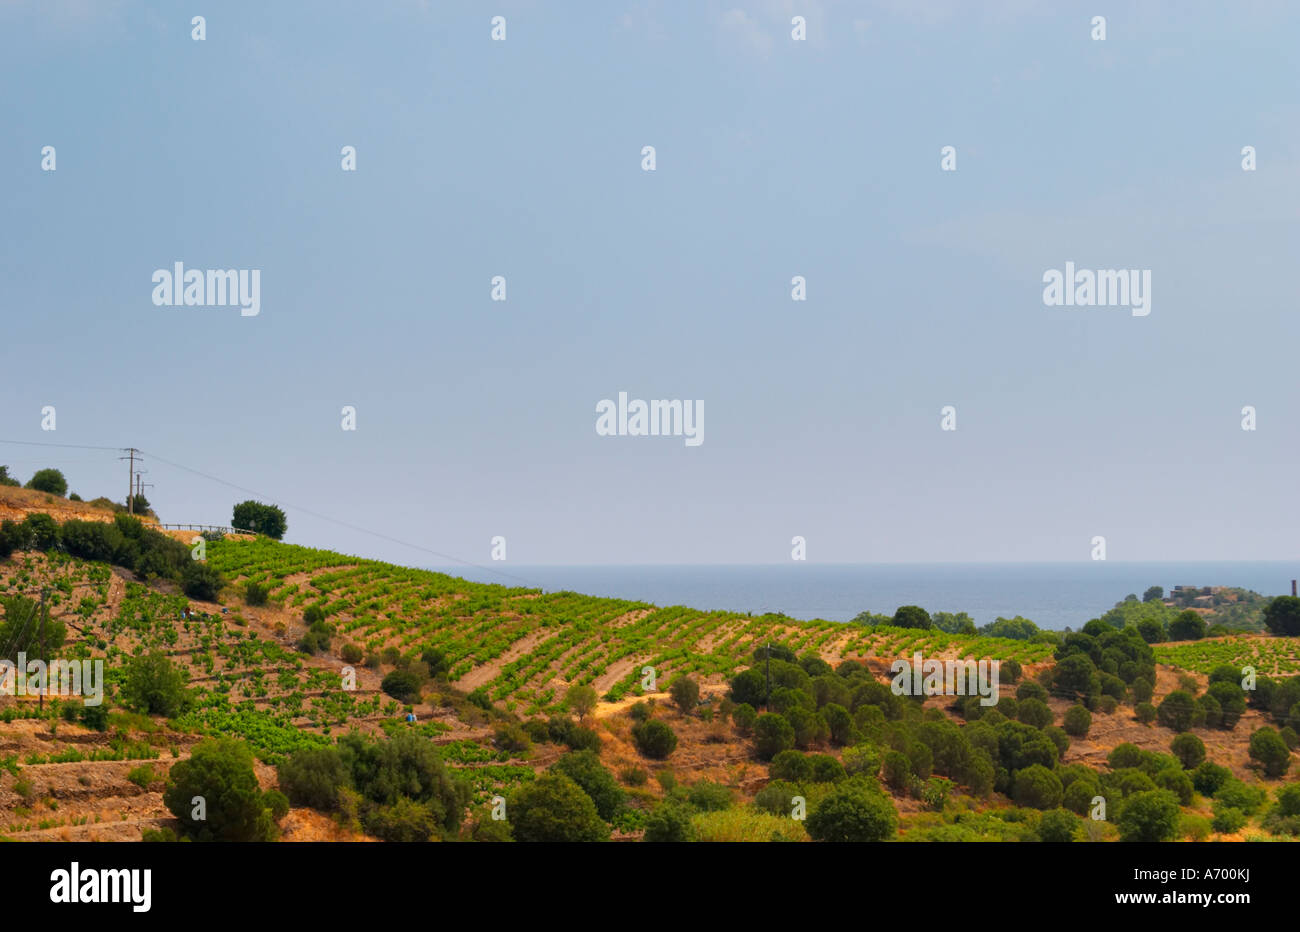 Domaine Coume del Mas. Banyuls-sur-Mer. Roussillon. Vineyards in early summer sunshine with vines in gobelet style. France. Europe. Vineyard. Stock Photo